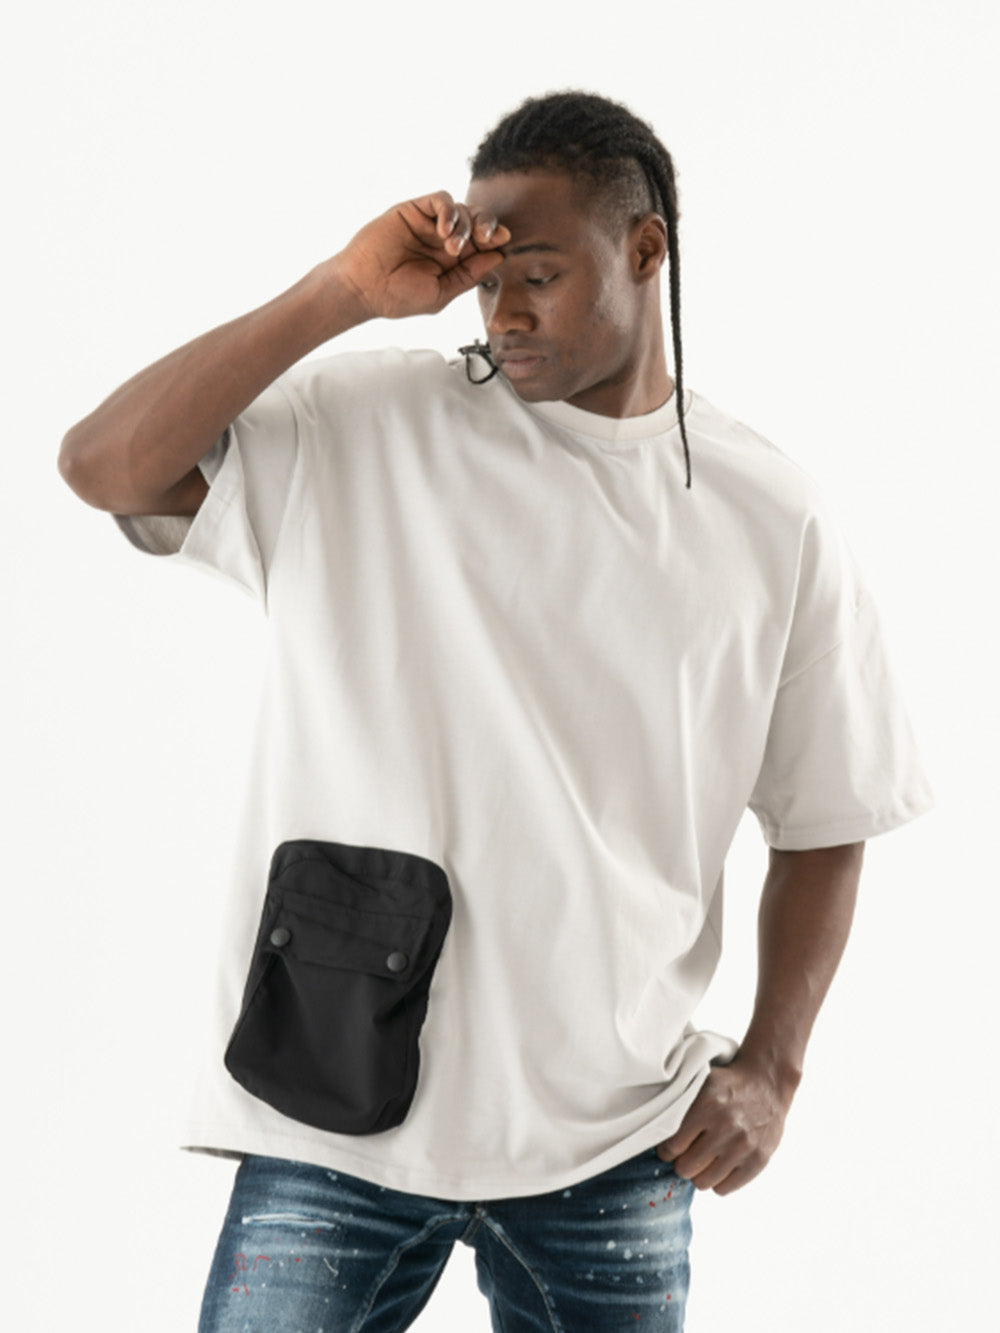 A man wearing an ELEVATE T-SHIRT with a black pocket.